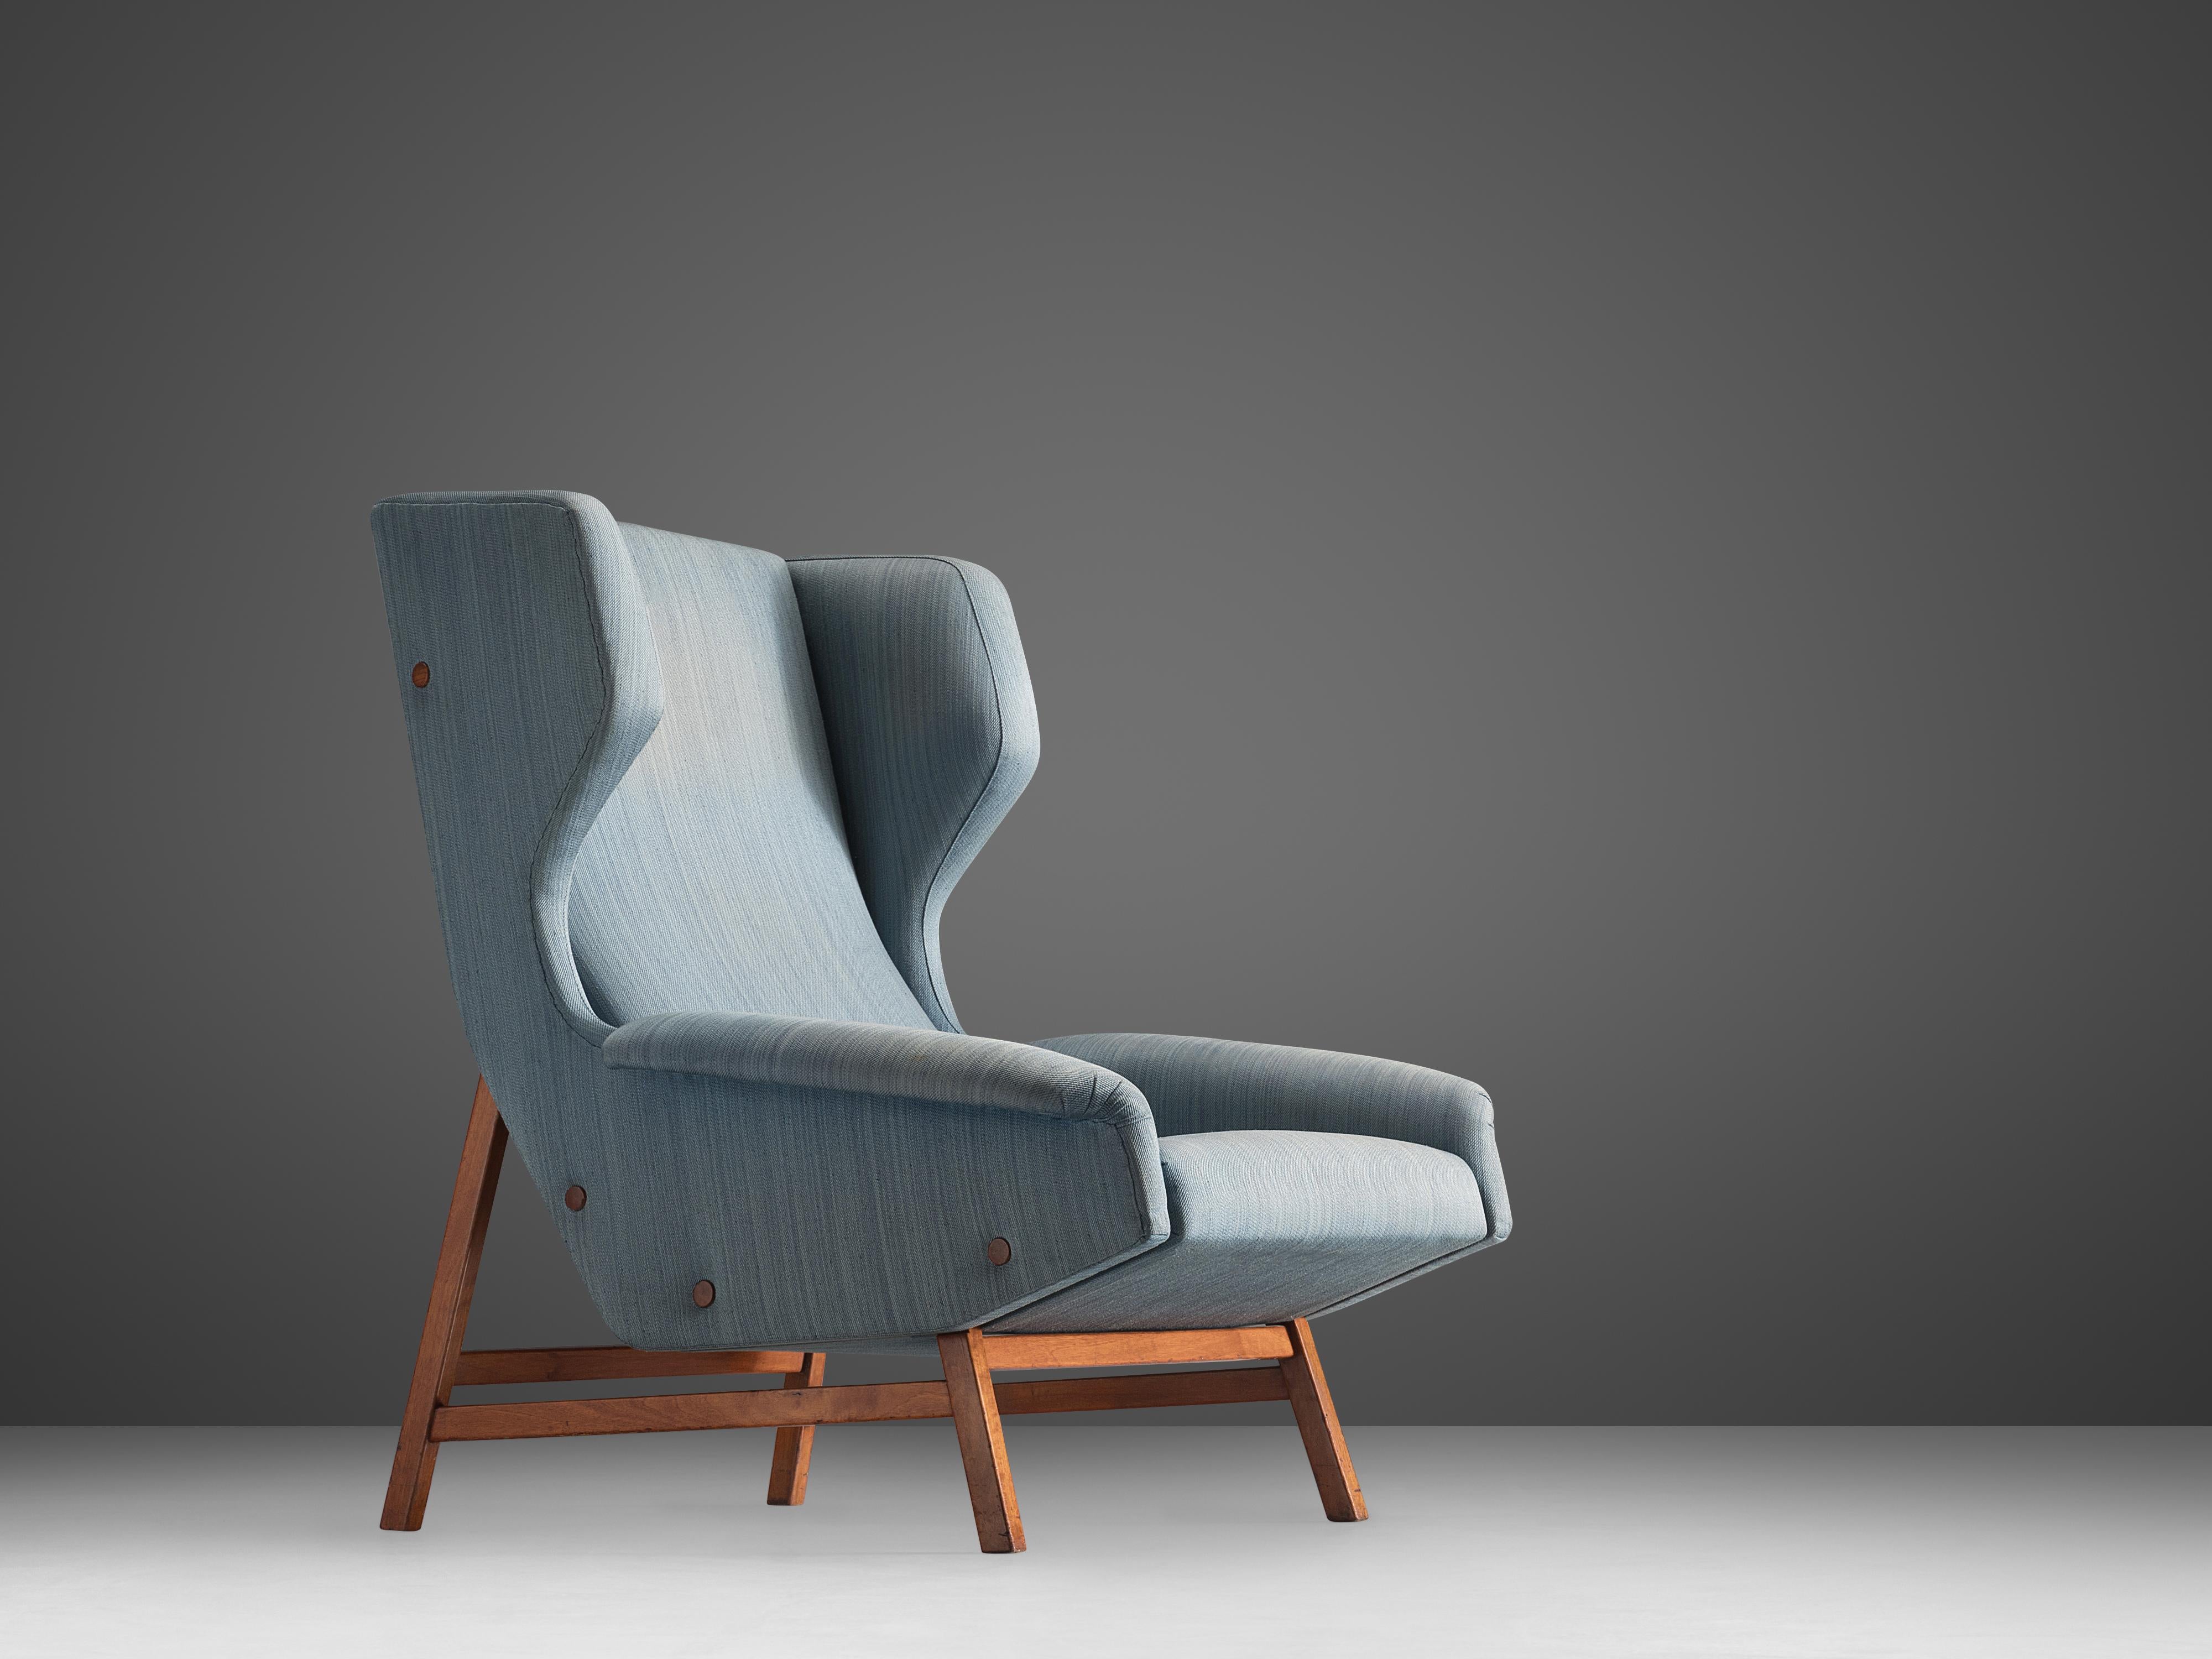 Gianfranco Frattini for Cassina, lounge chair model 877, blue fabric and teak, Italy, circa 1959

Sturdy and voluminous lounge chair in blue original fabric. This wingback chair shows nice details and elegant lines. The buttons on the outside of